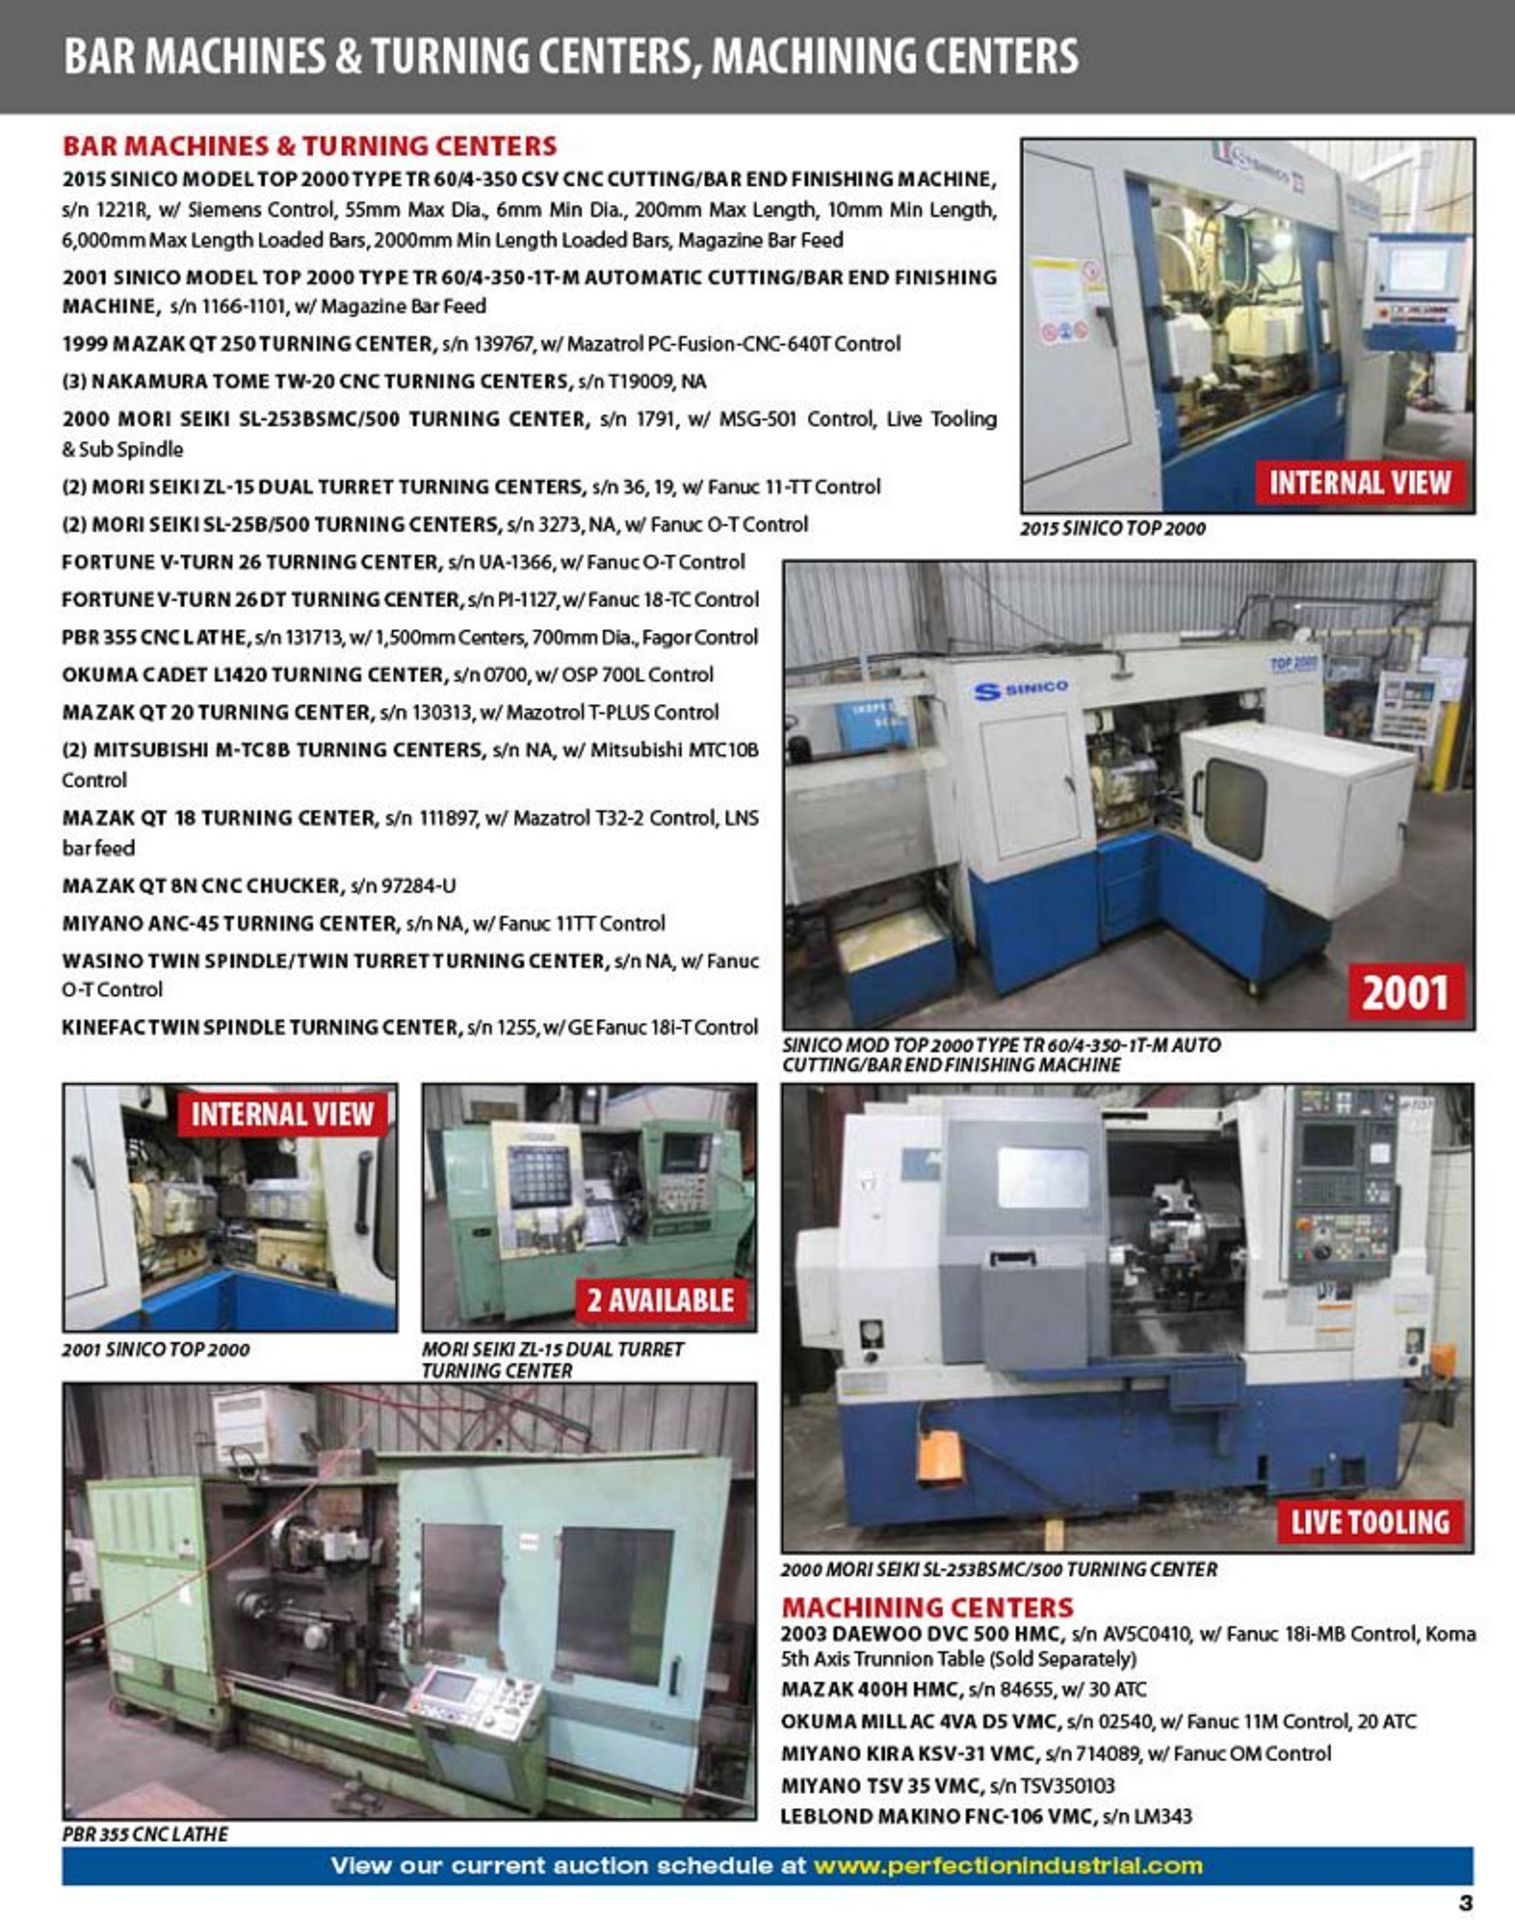 FEAT: CNC Bar Machines, Forging Presses, Heat Treat, Machine Tools, Gear Machinery Support - Image 3 of 6